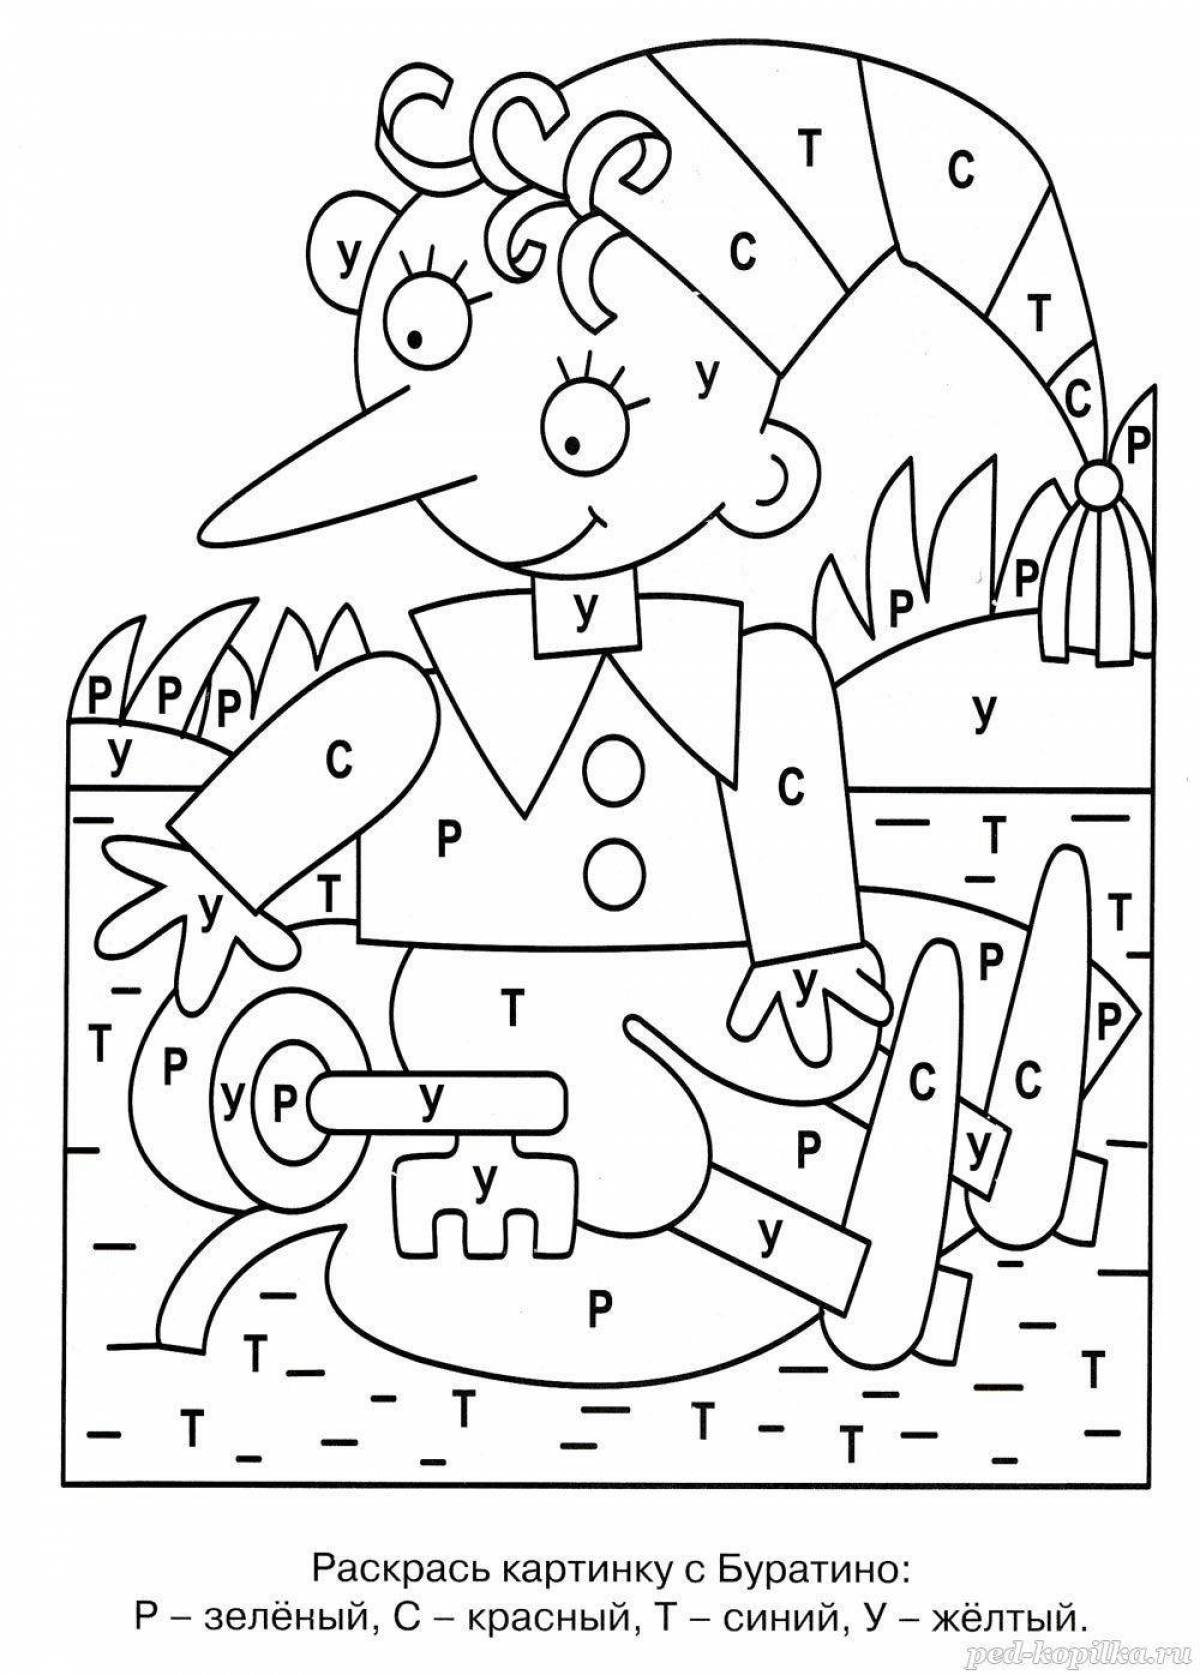 Innovative coloring book with tasks for children 6-7 years old